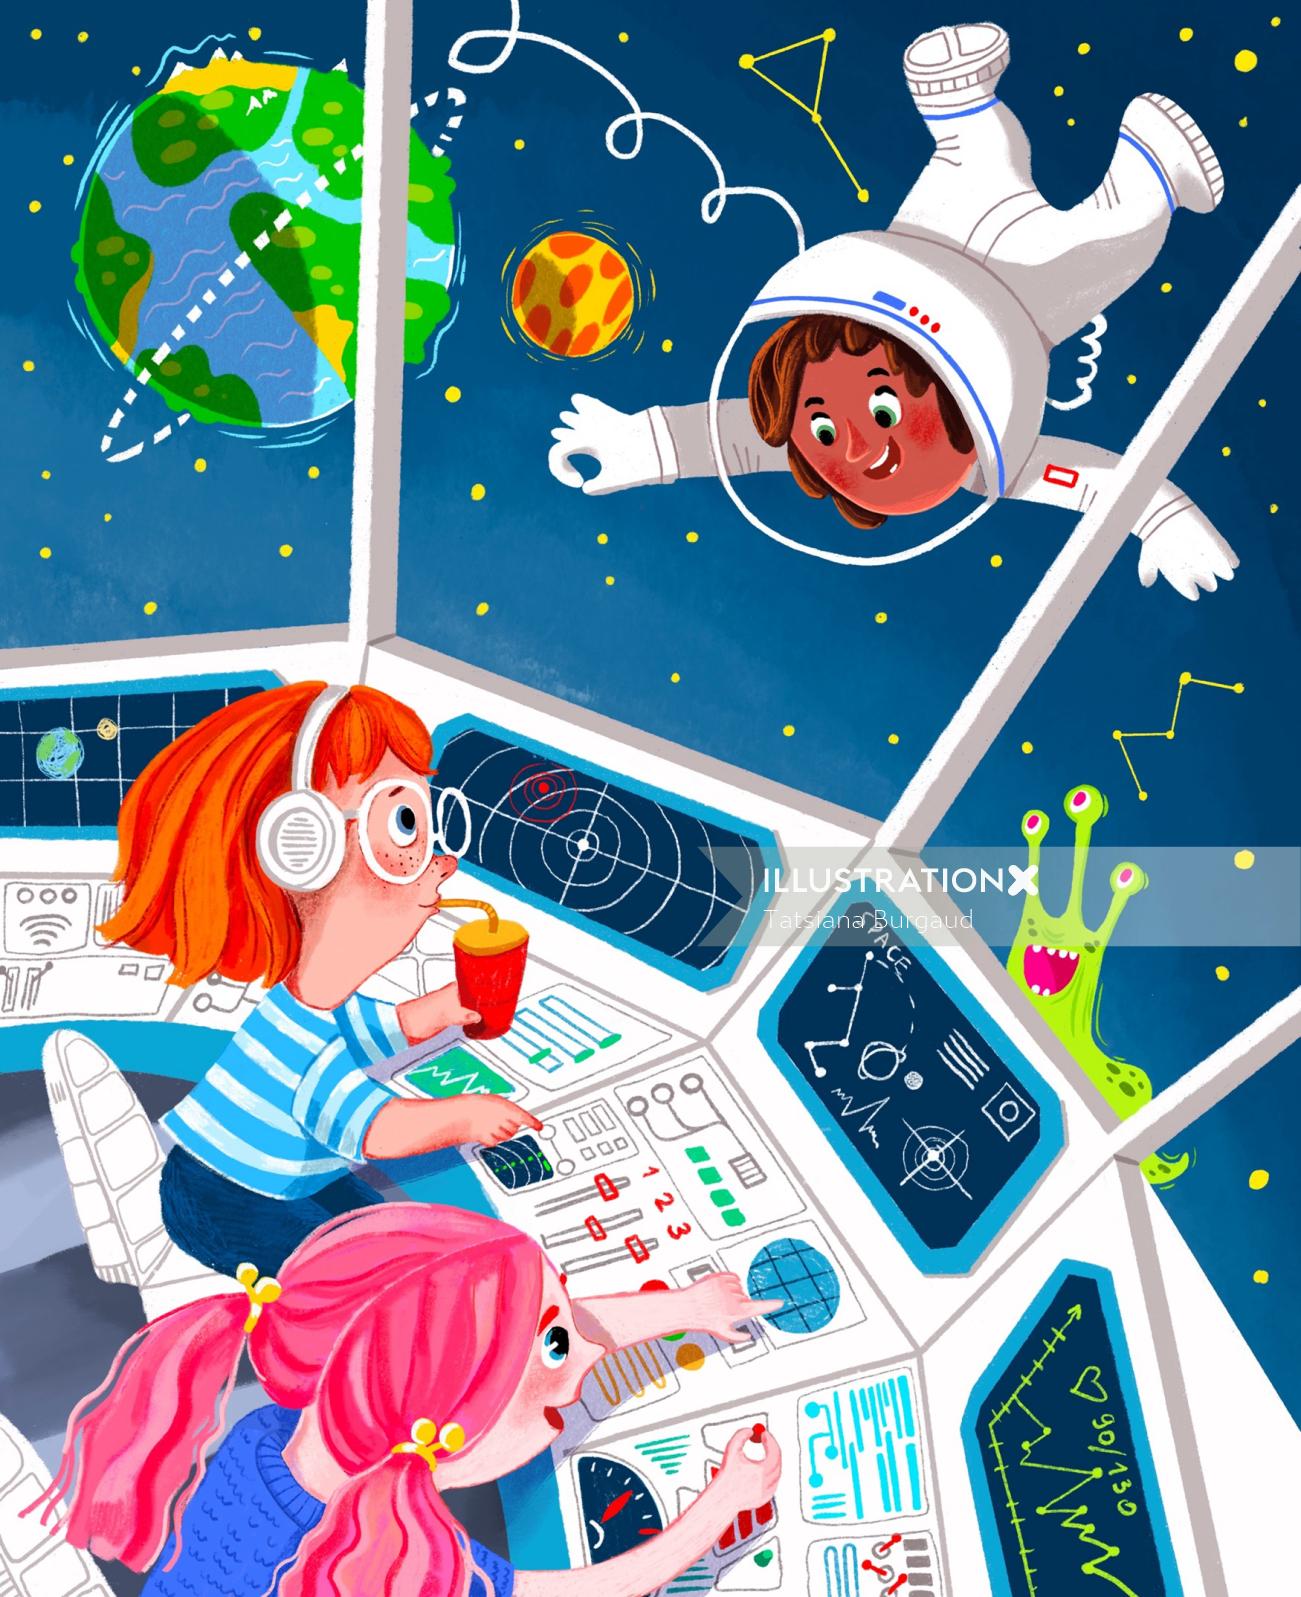 Kids in a spaceship illustration for the book Hello Hello